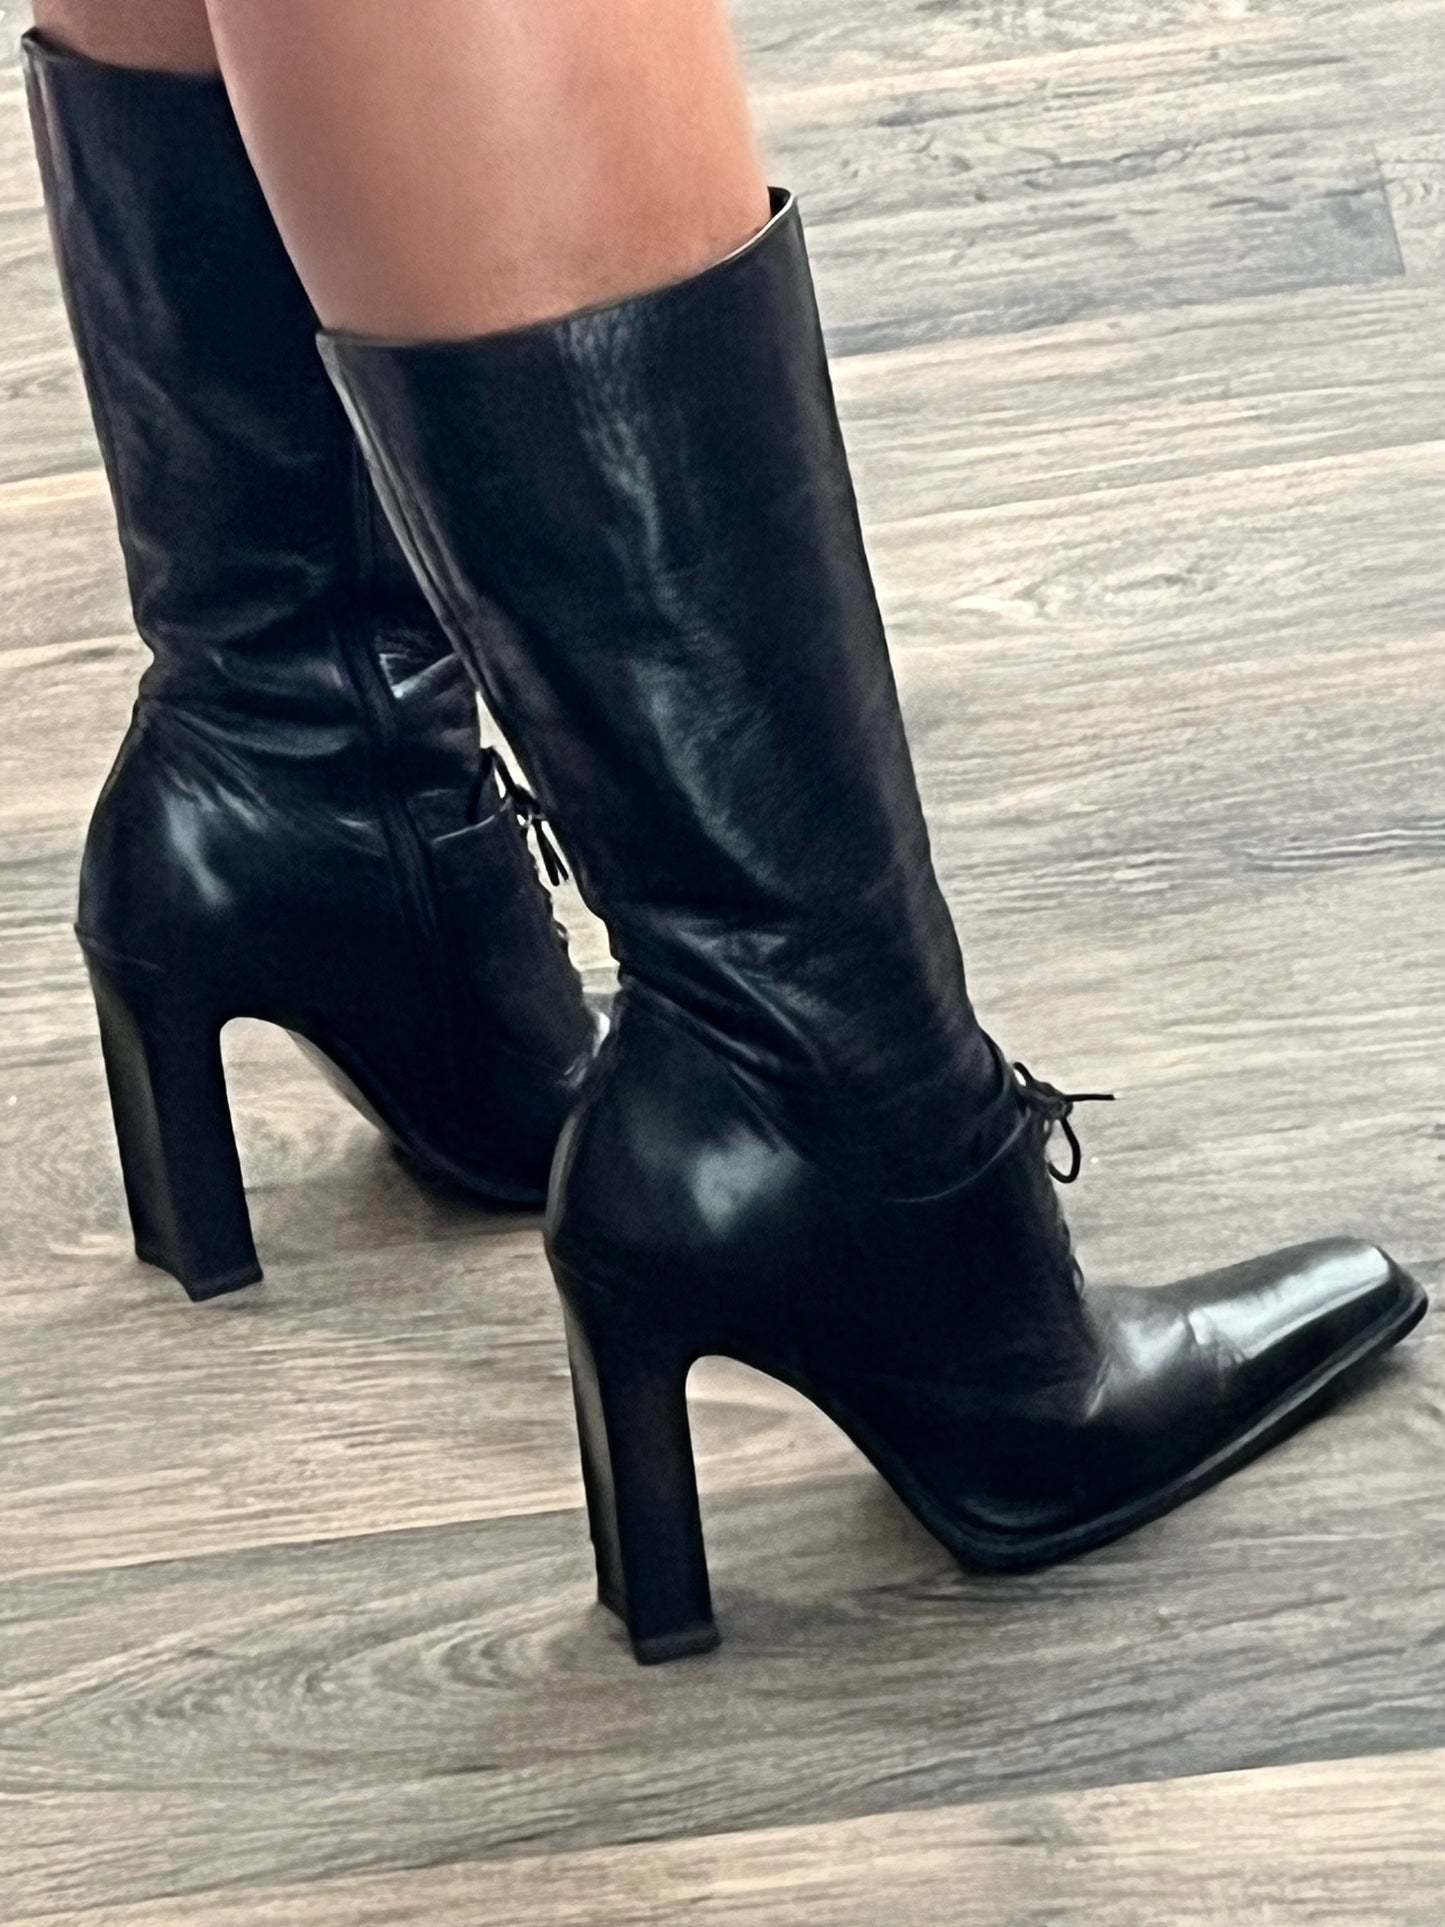 Vintage leather boots